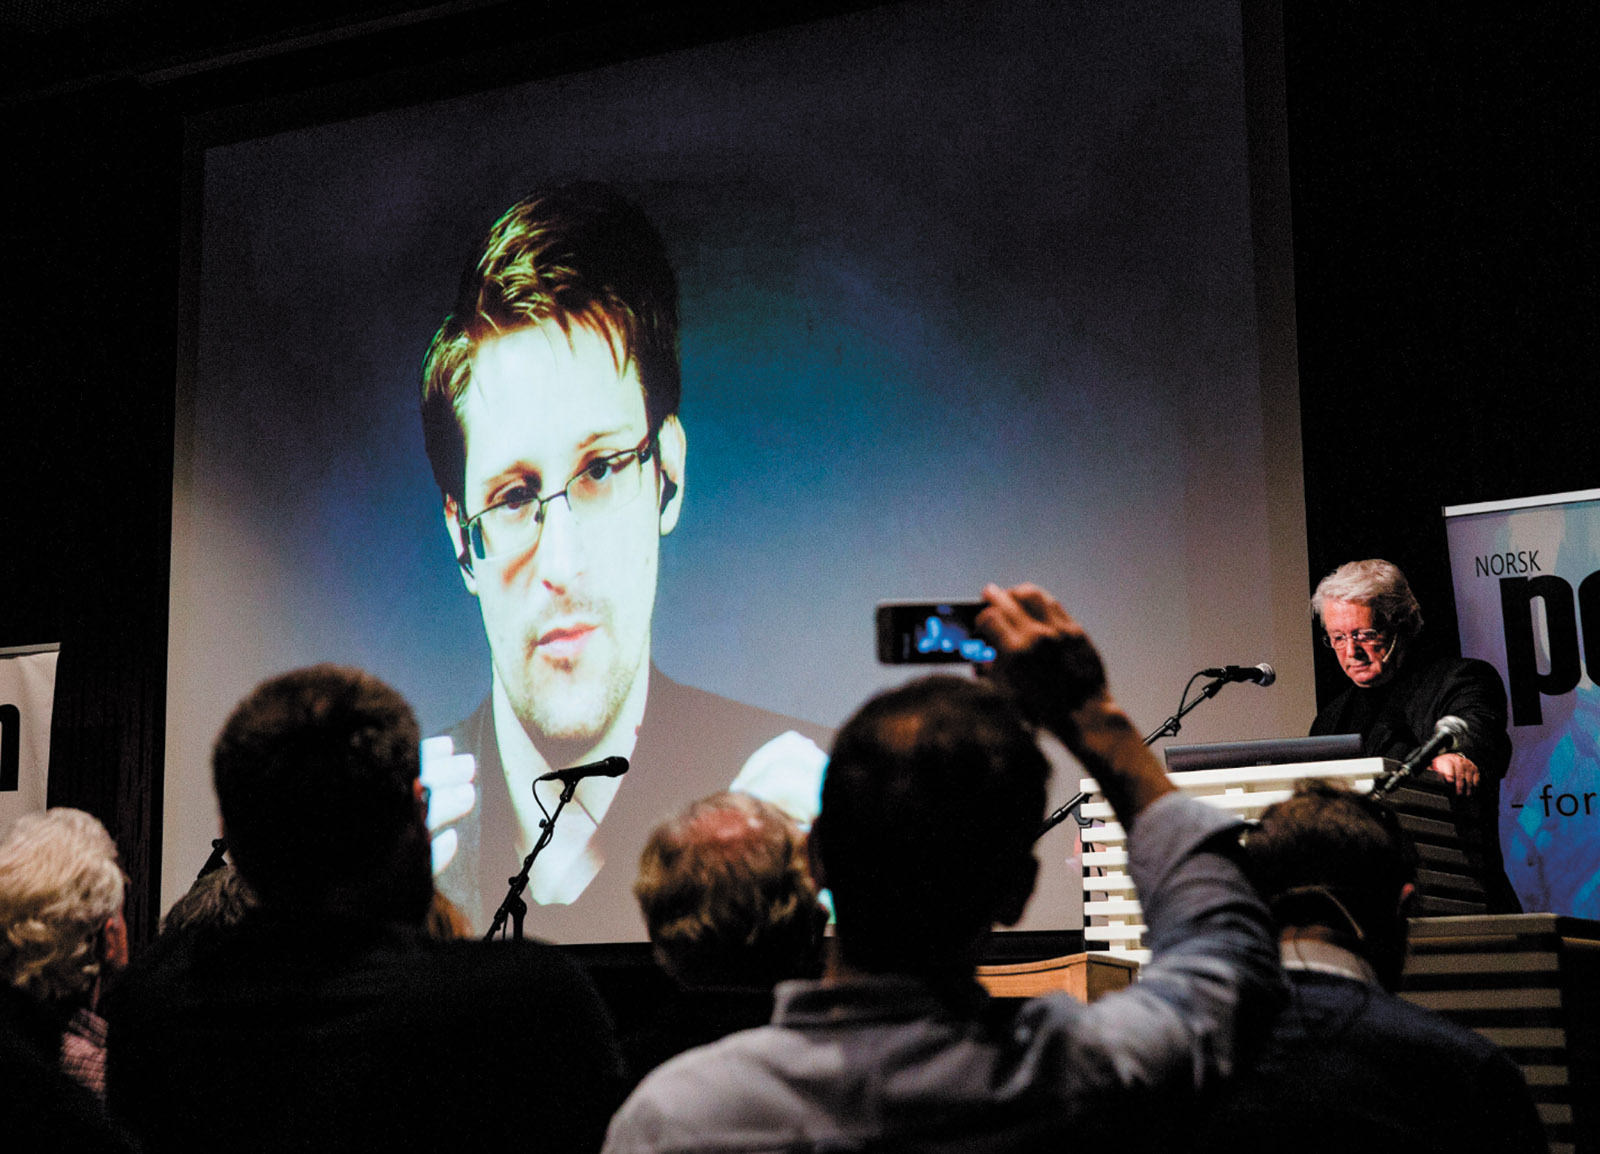 Edward Snowden seen live from Moscow at the Norwegian PEN event ‘Waiting for Snowden,’ where he was awarded the Ossietzky Prize for ‘outstanding contributions to freedom of expression,’ Oslo, November 2016